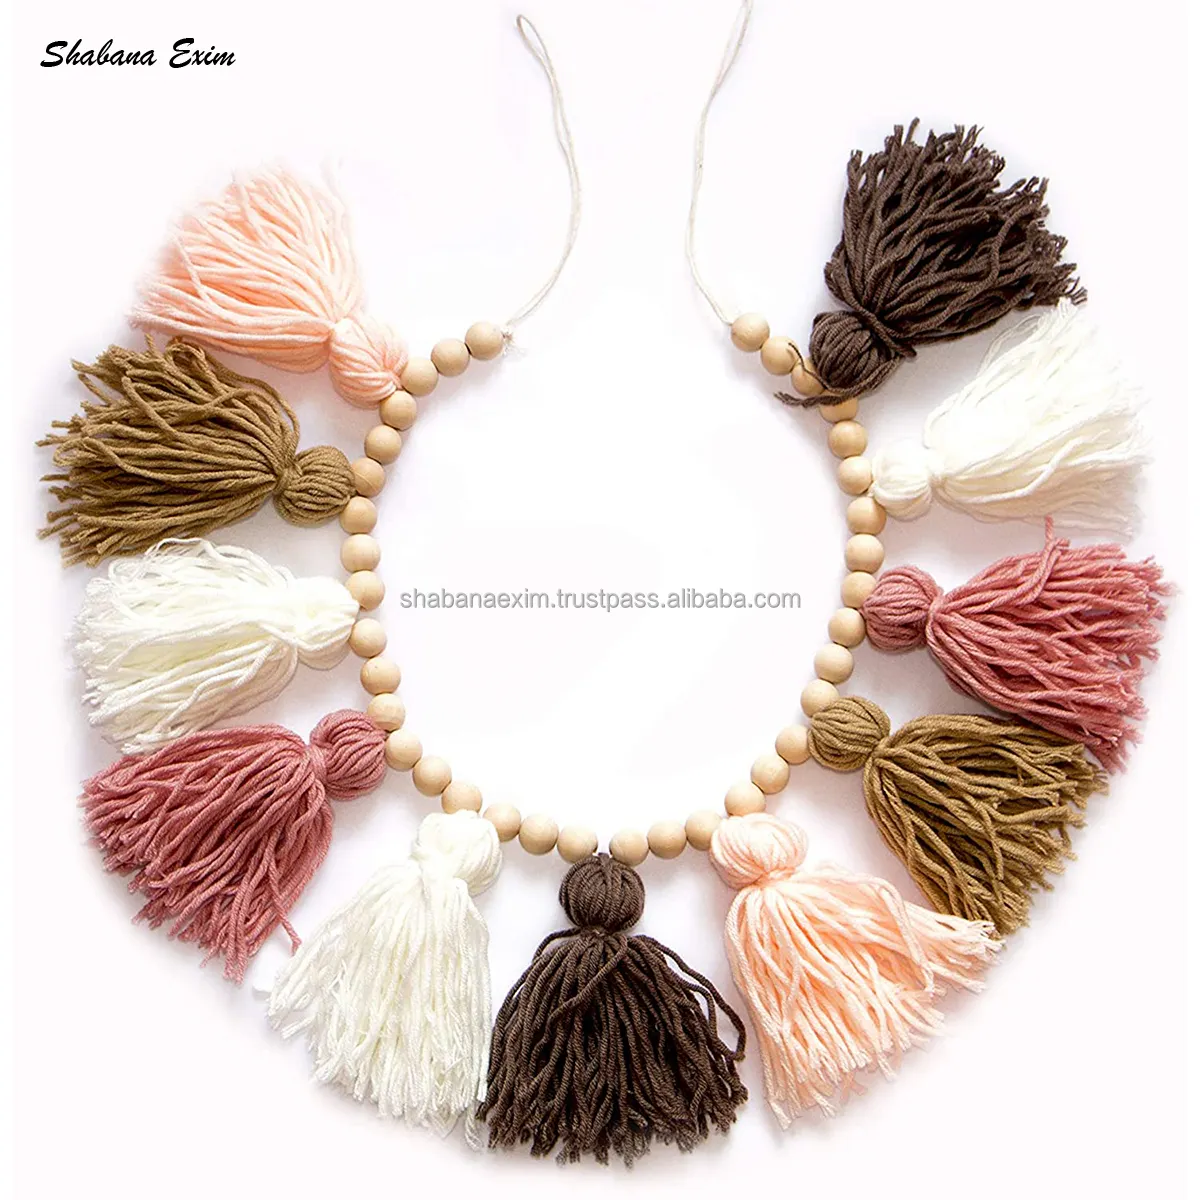 Different Design Handmade Beads Colorful Tassel Garland Macrame Wall Hanging Art Decoration Garland with High Quality from India